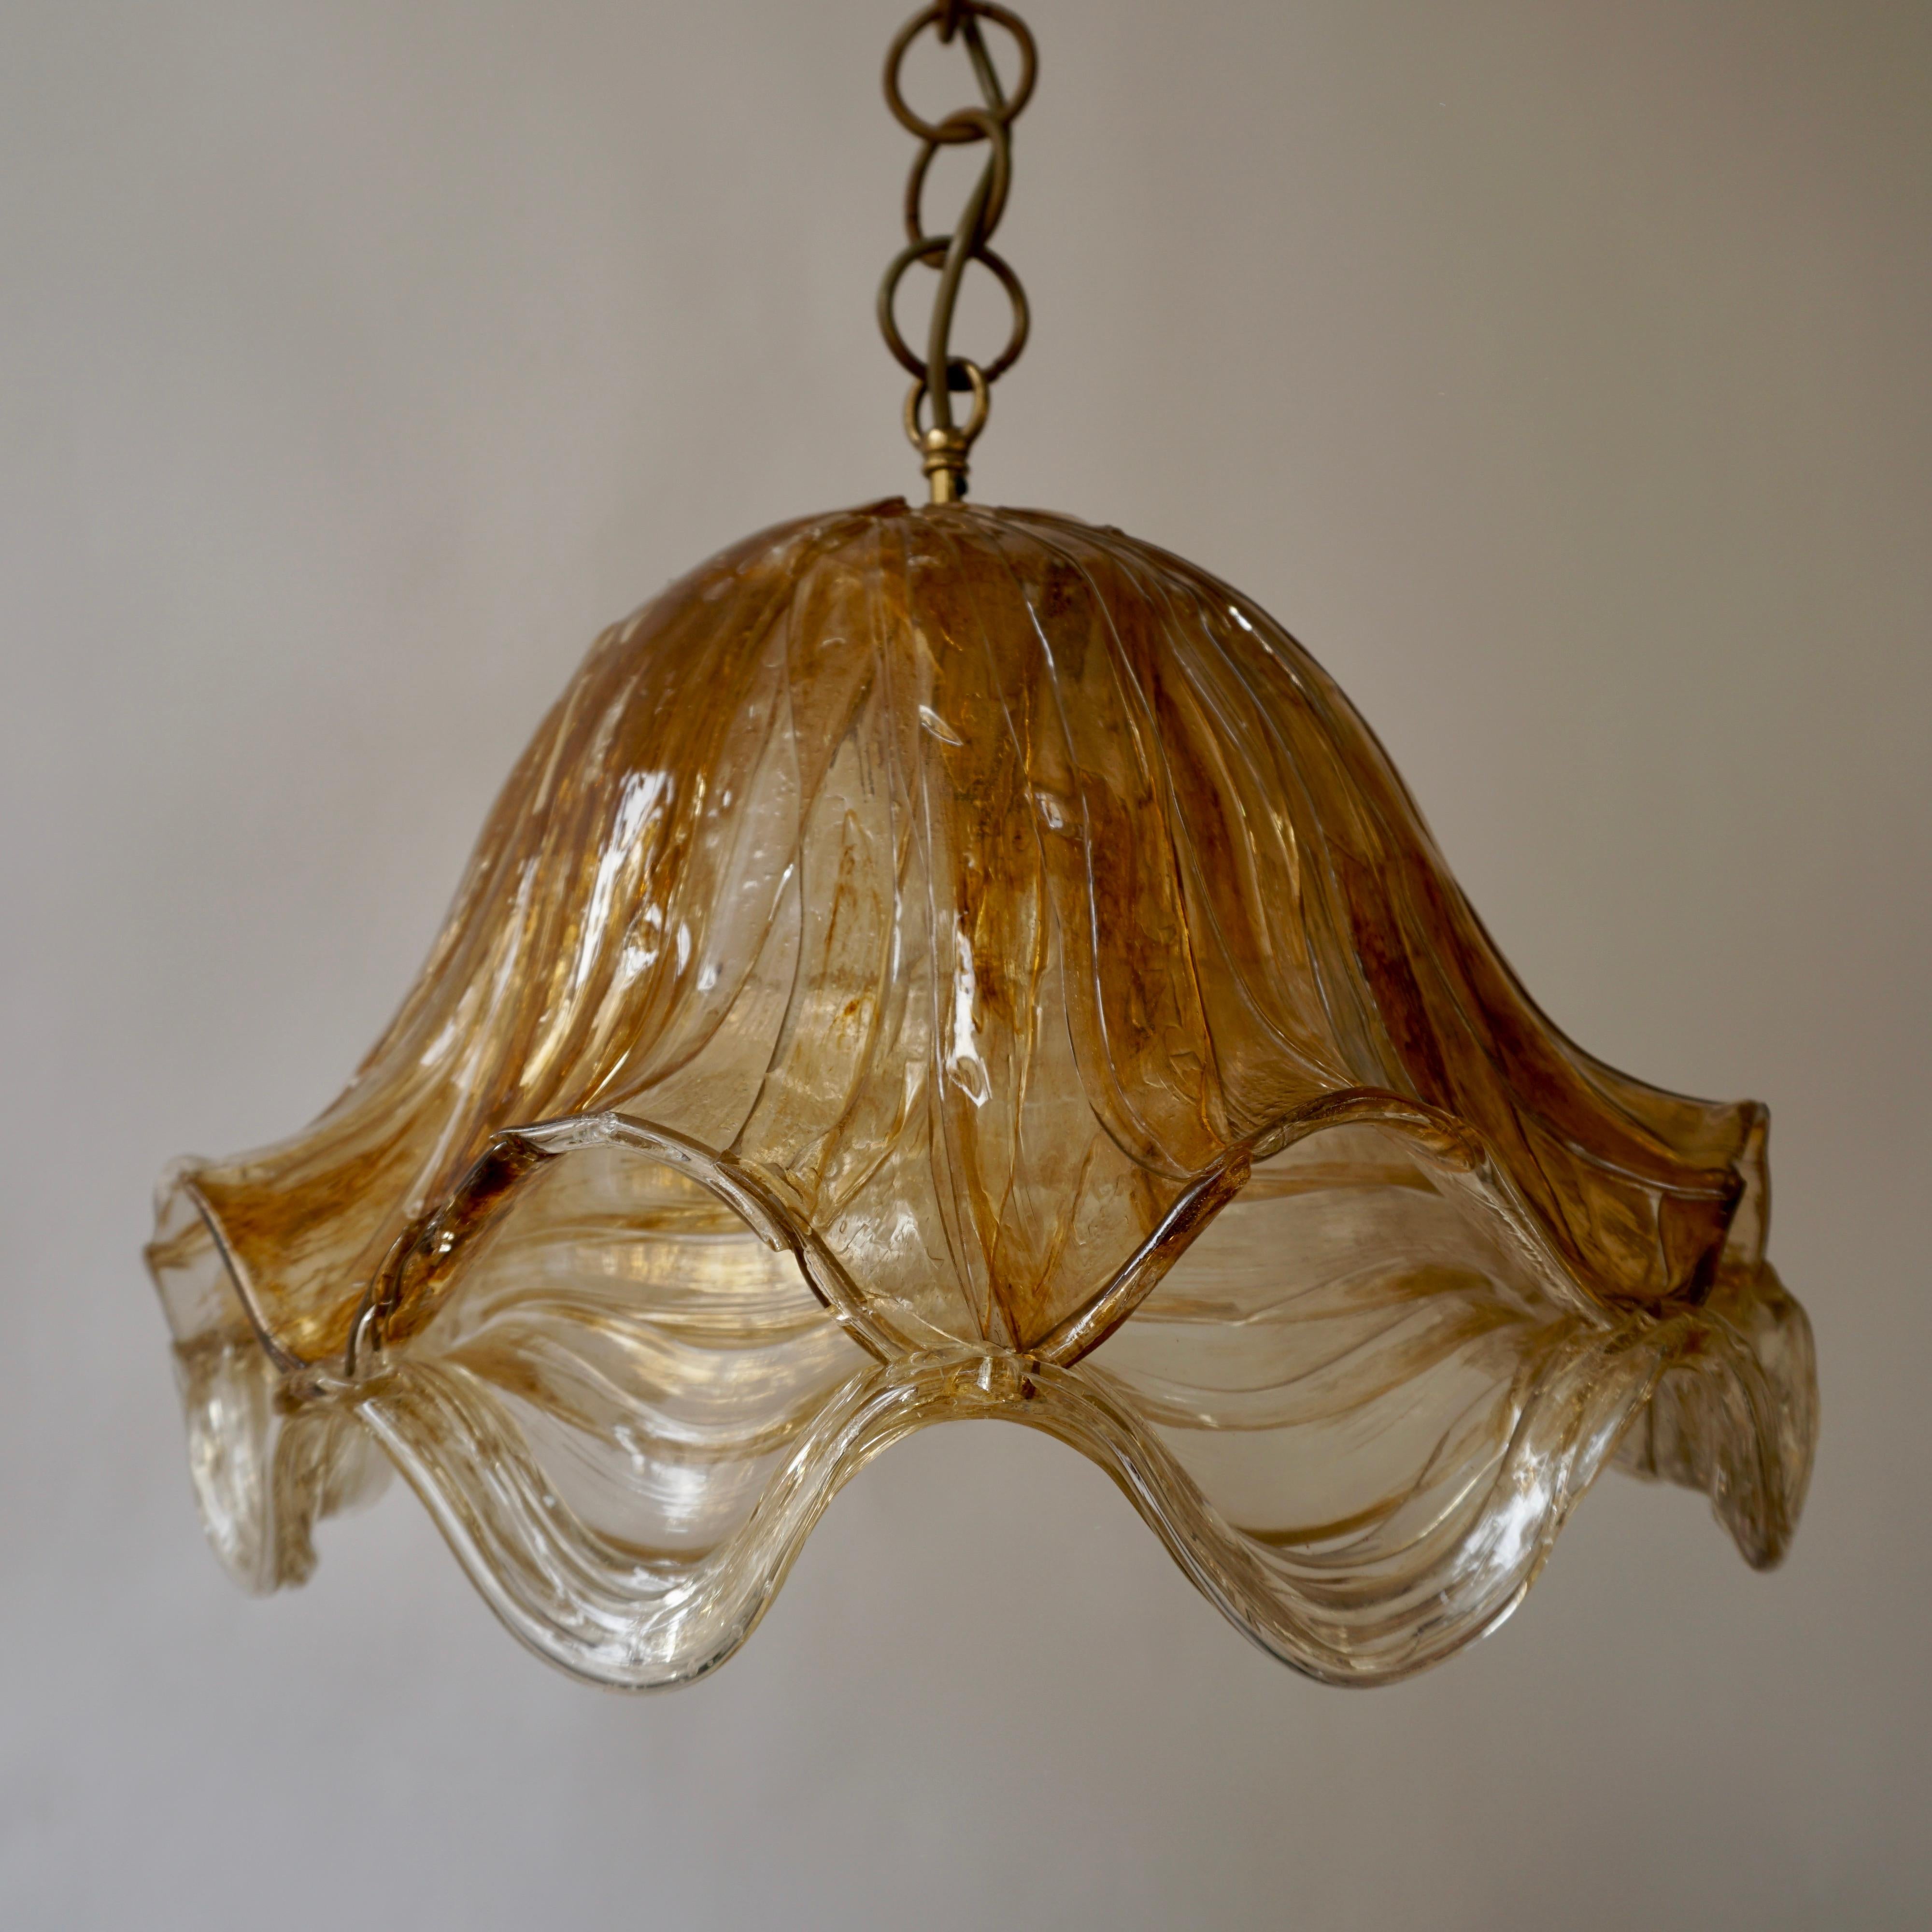 Brown and transparent acrylic ceiling light, 1970s.
Measures: Diameter 44 cm.
Height fixture 33 cm.
Total height including the chain and canopy 110 cm.